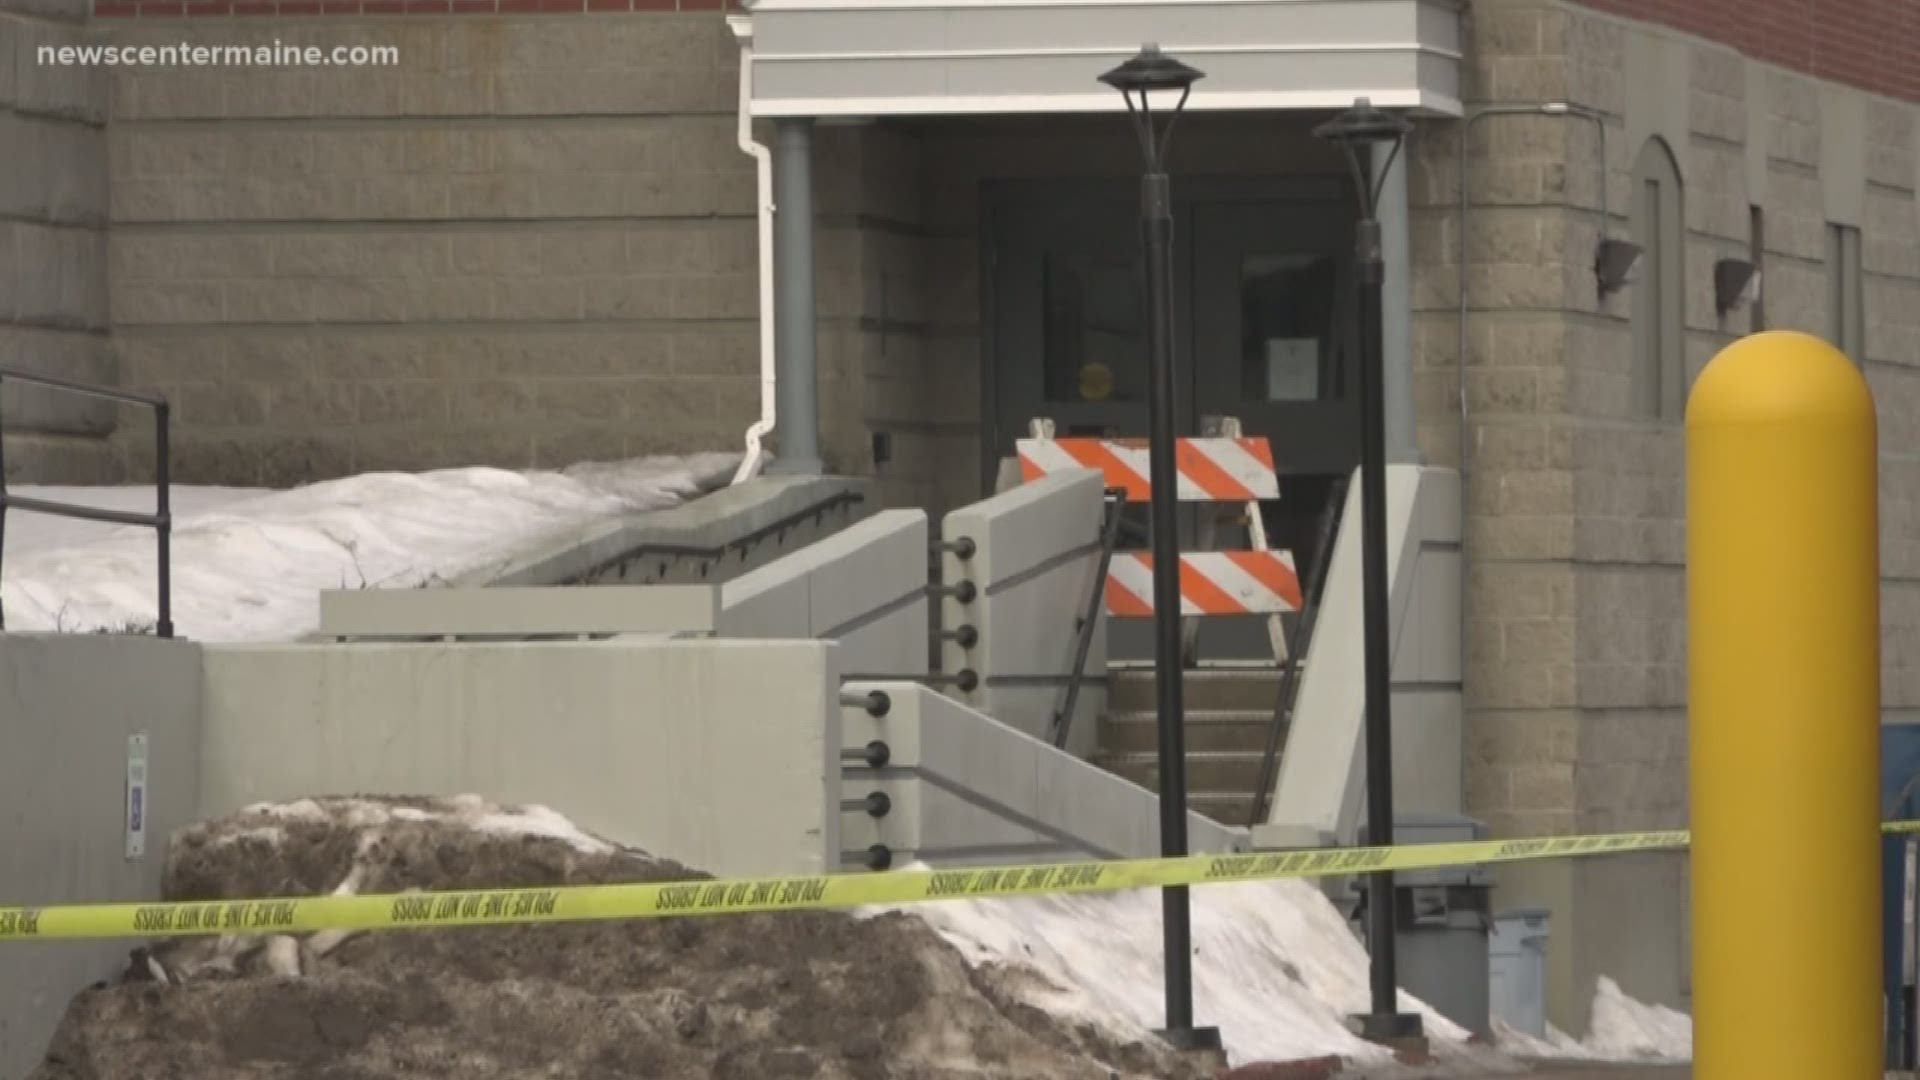 Two packages left unattended at the Penobscot County Jail in Bangor today — led to a full response by Police, Fire, and Bomb Squad officials.